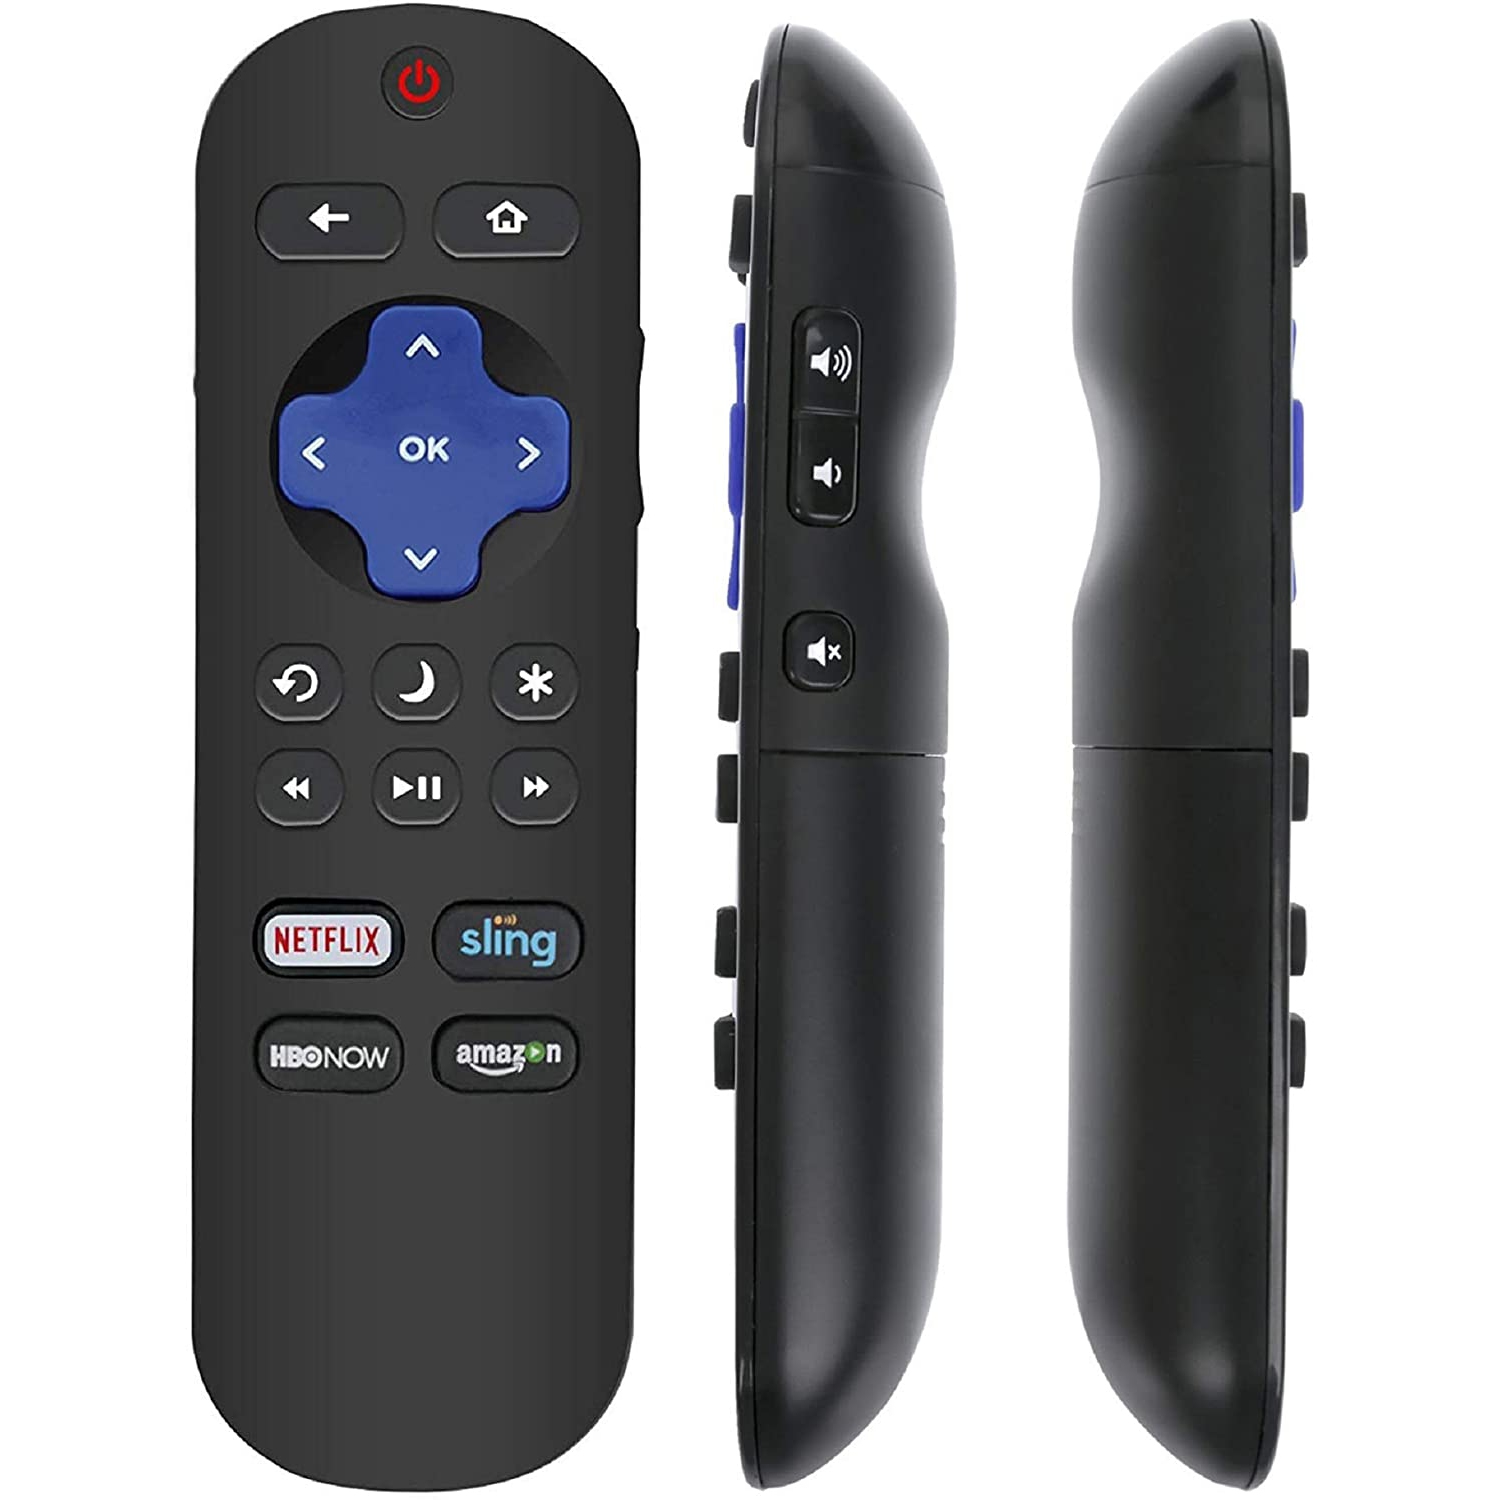 LC-RCRUS-17 LCRCRUS17 Remote Control fit for Sharp Roku Smart TV LC-50LB481U LC-43LB481U LC-55LB481U LC50LB481U